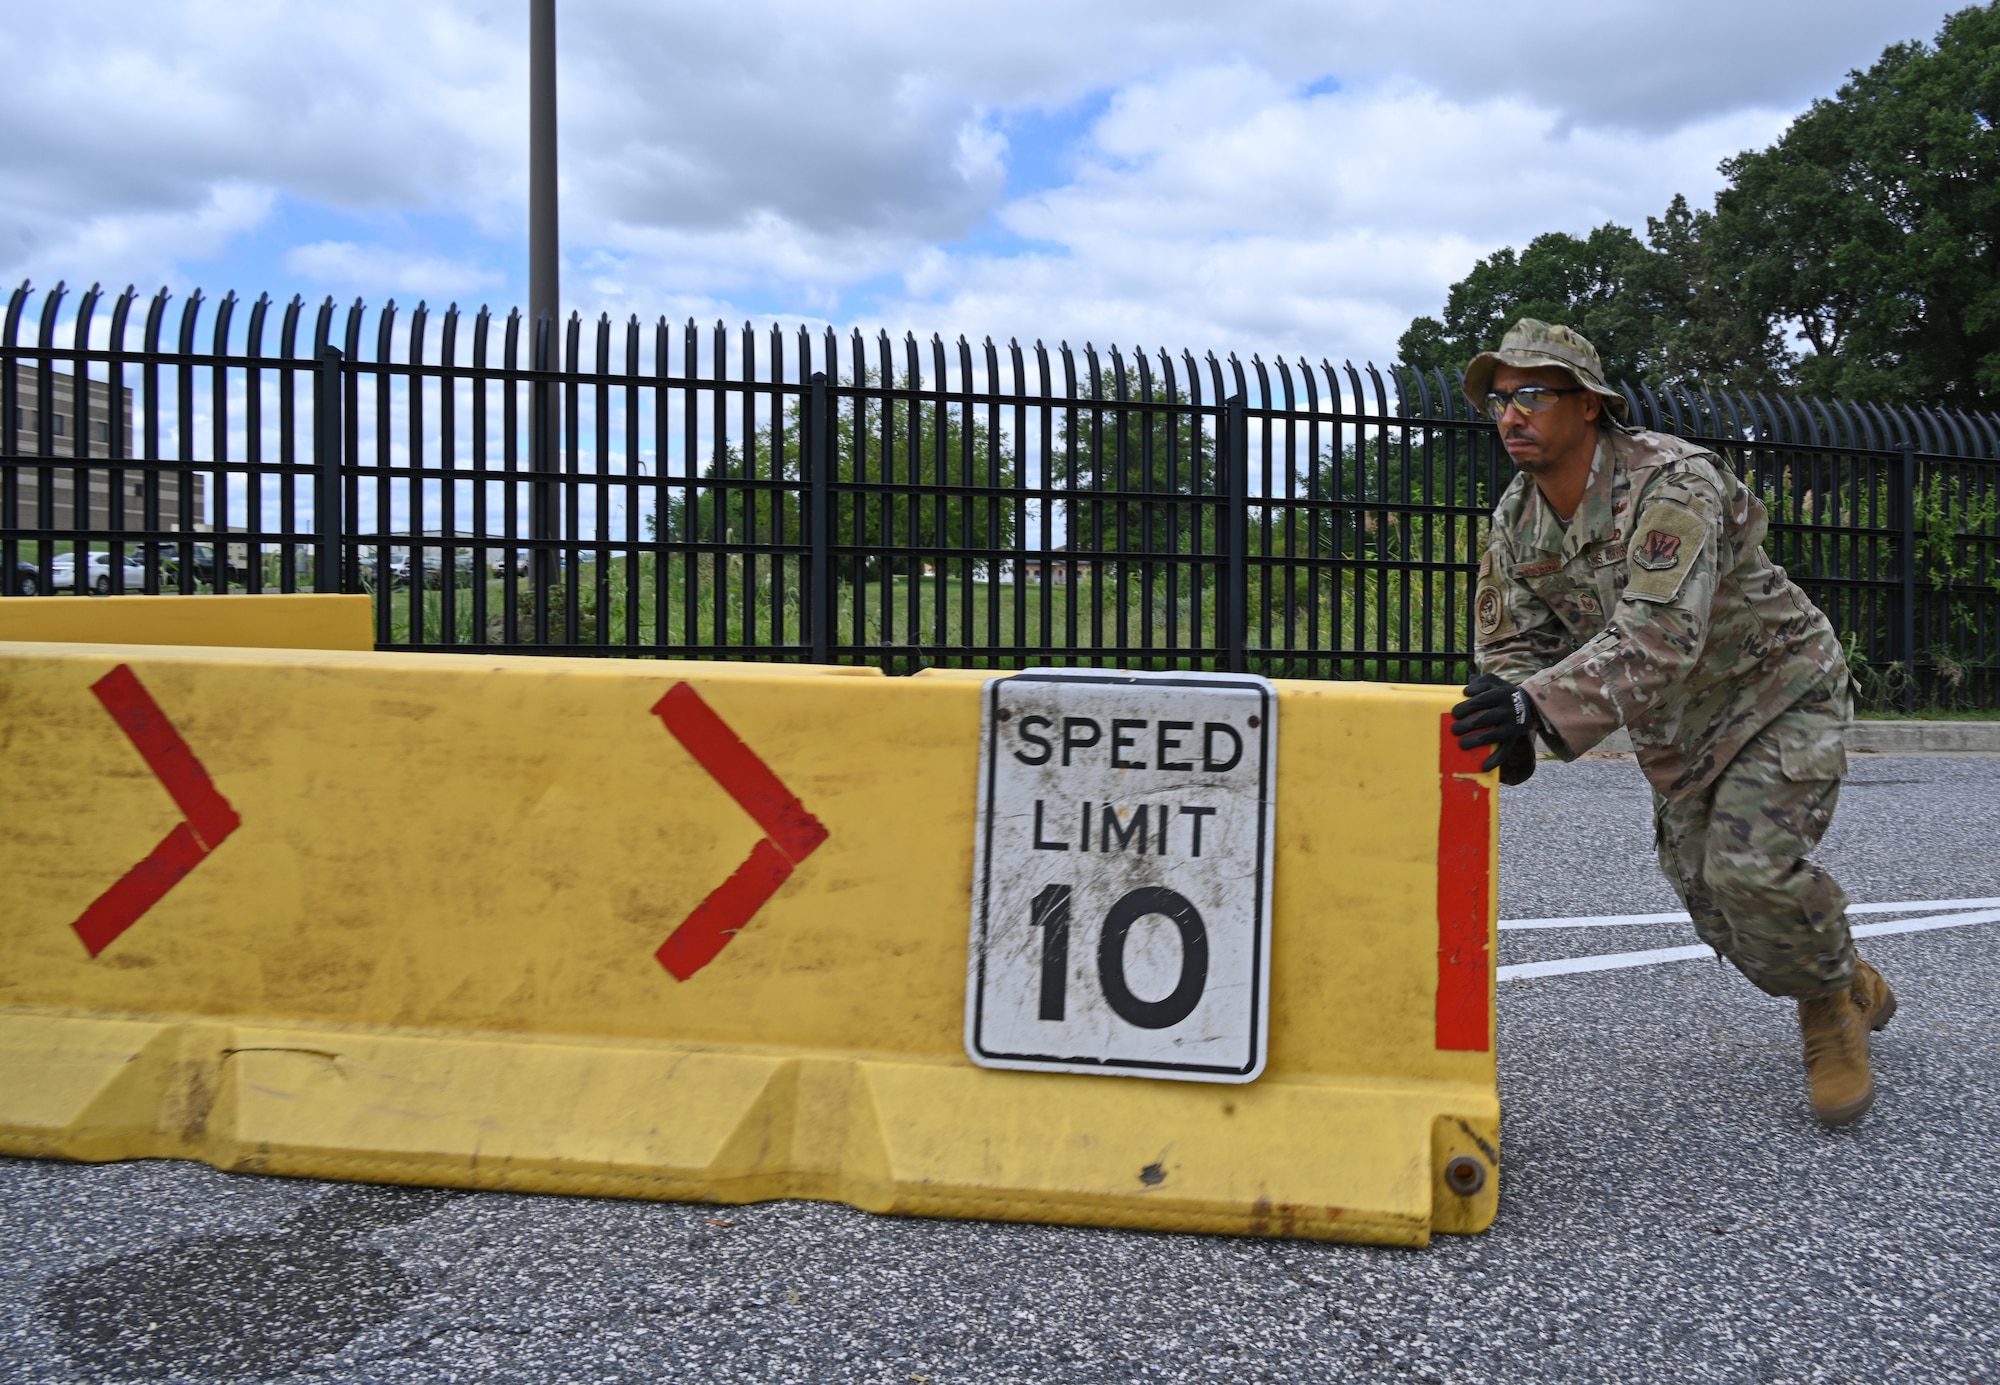 U.S. Air Force Master Sgt. Alvin Henson, facilities manager assigned to the 175th Civil Engineer Squadron, assists with setting up a barrier at the front gate of Warfield Air National Guard Base at Martin State Airport during an Anti-terrorism/force protection exercise at Warfield Air National Guard Base at Martin State Airport, Middle River, Md. on September 8, 2022.